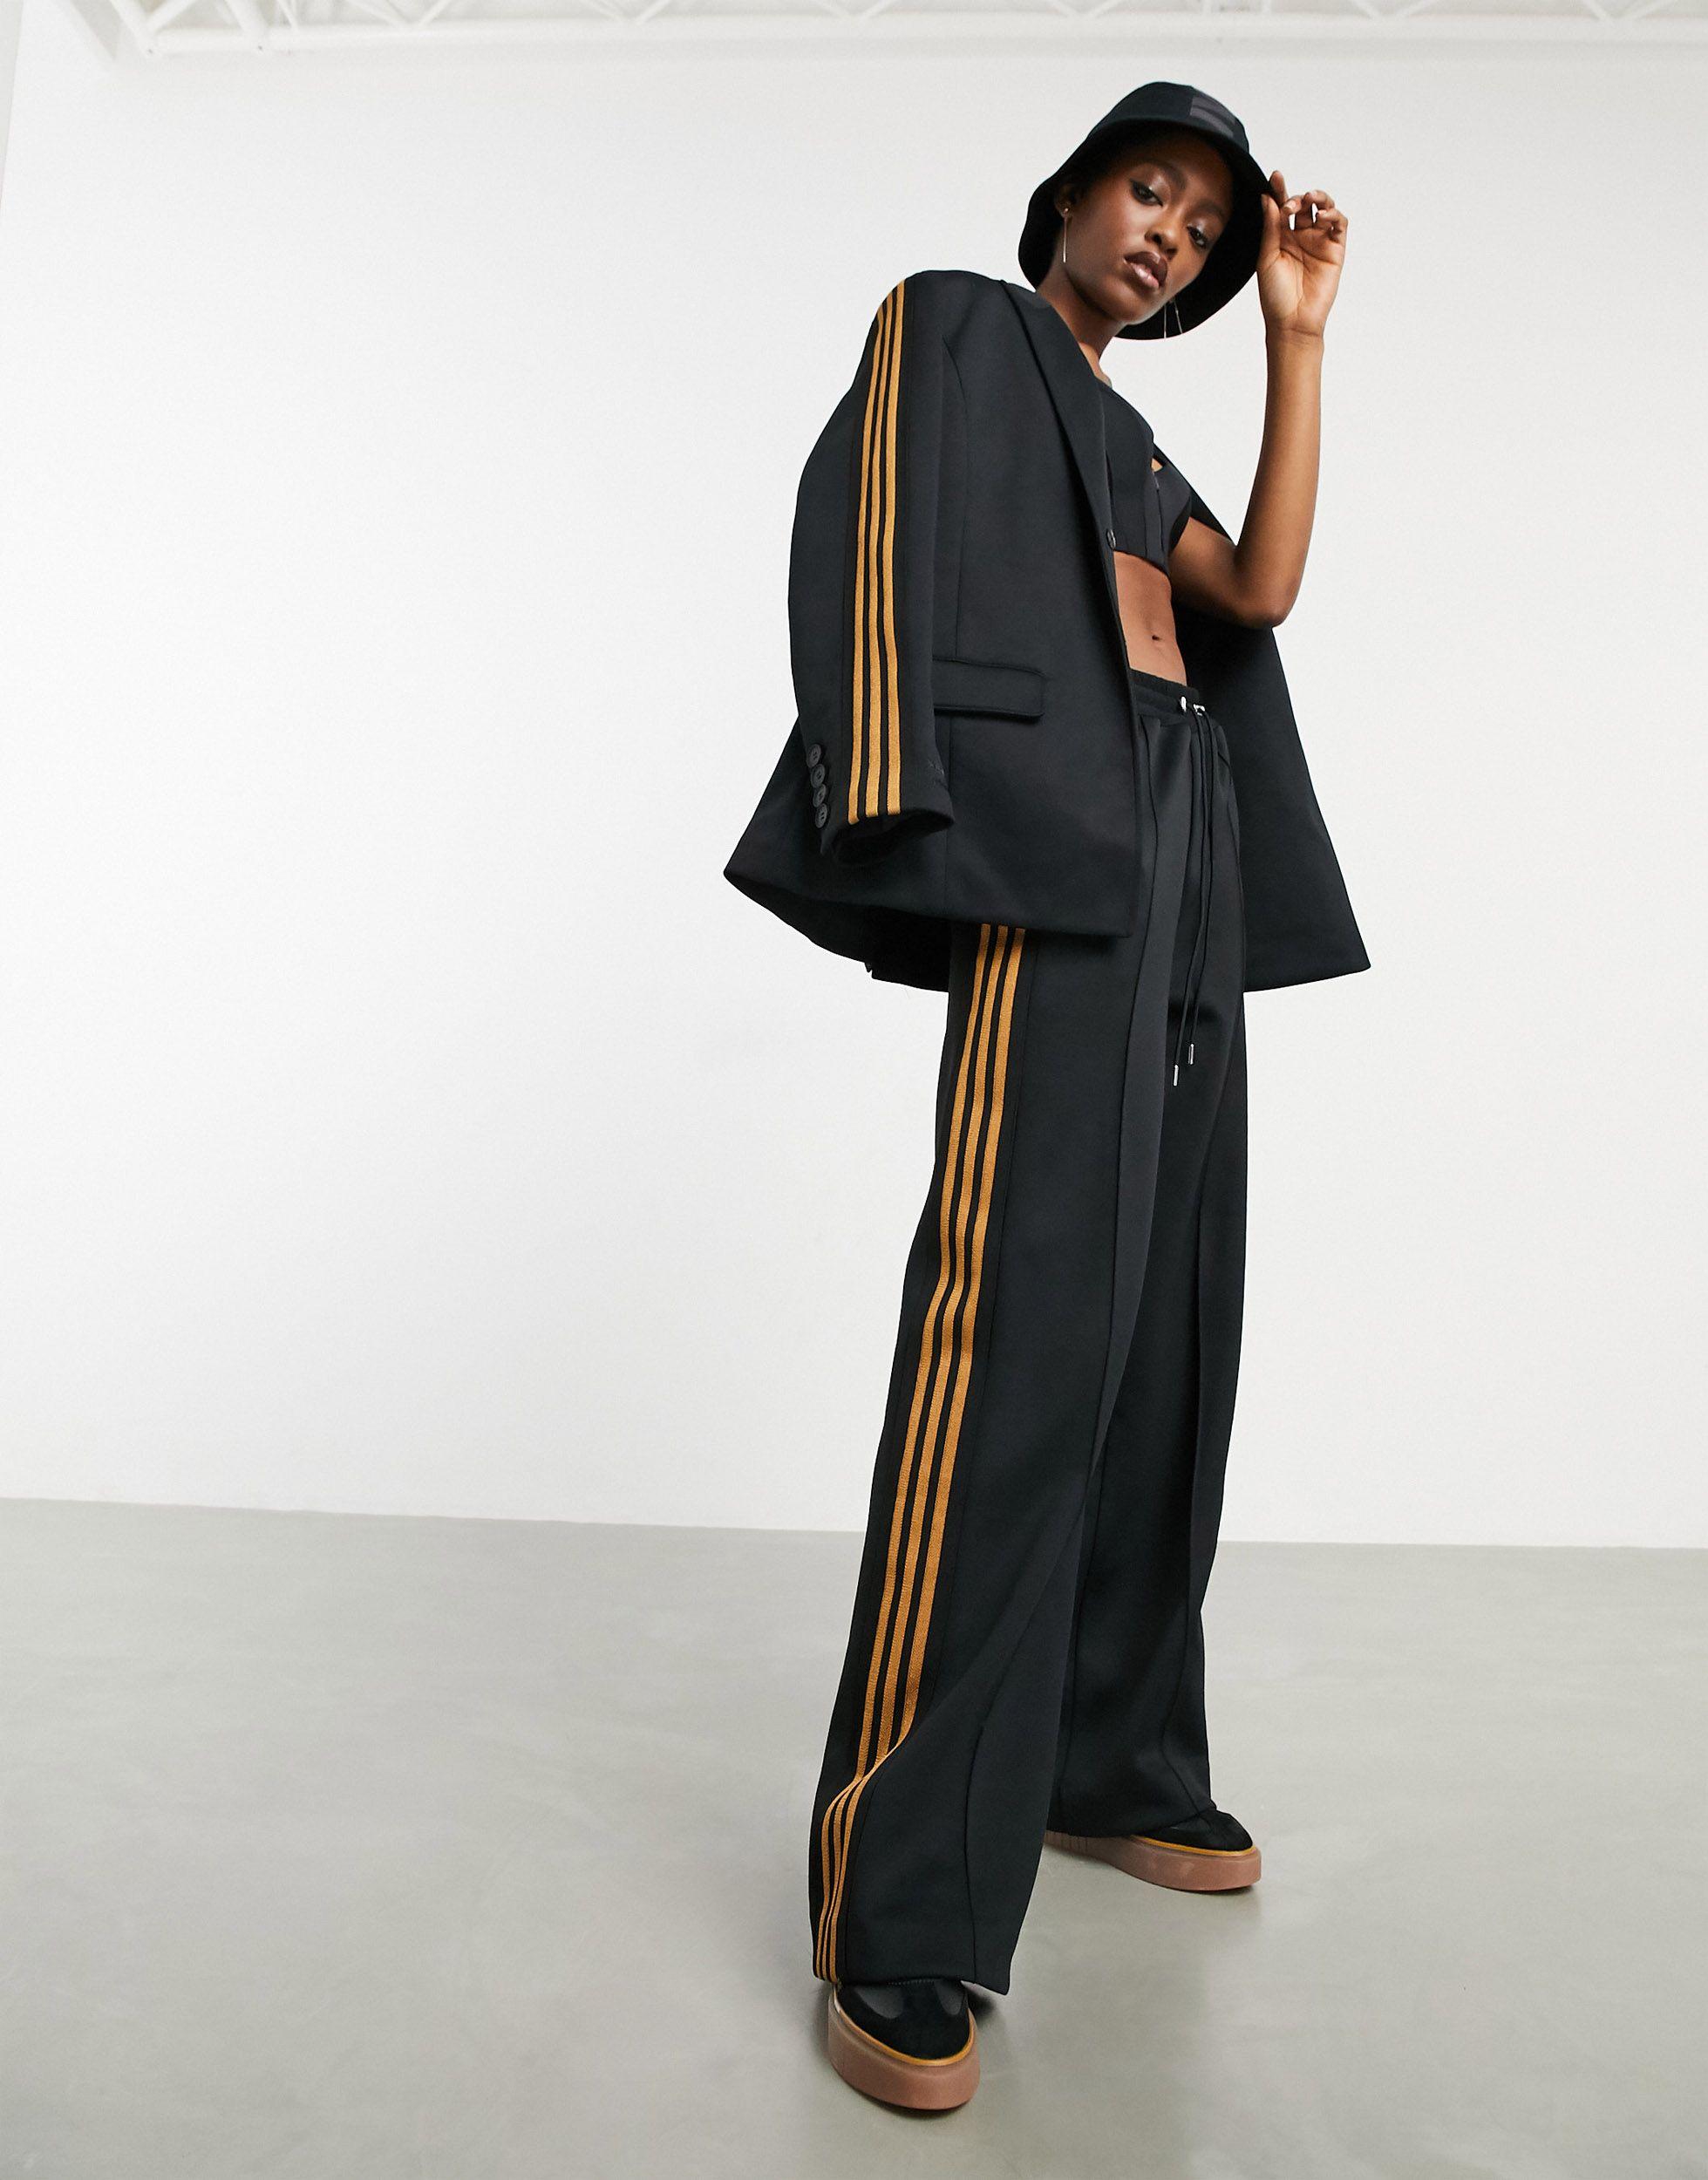 Ivy Park Adidas X Wide Leg Trousers in Black